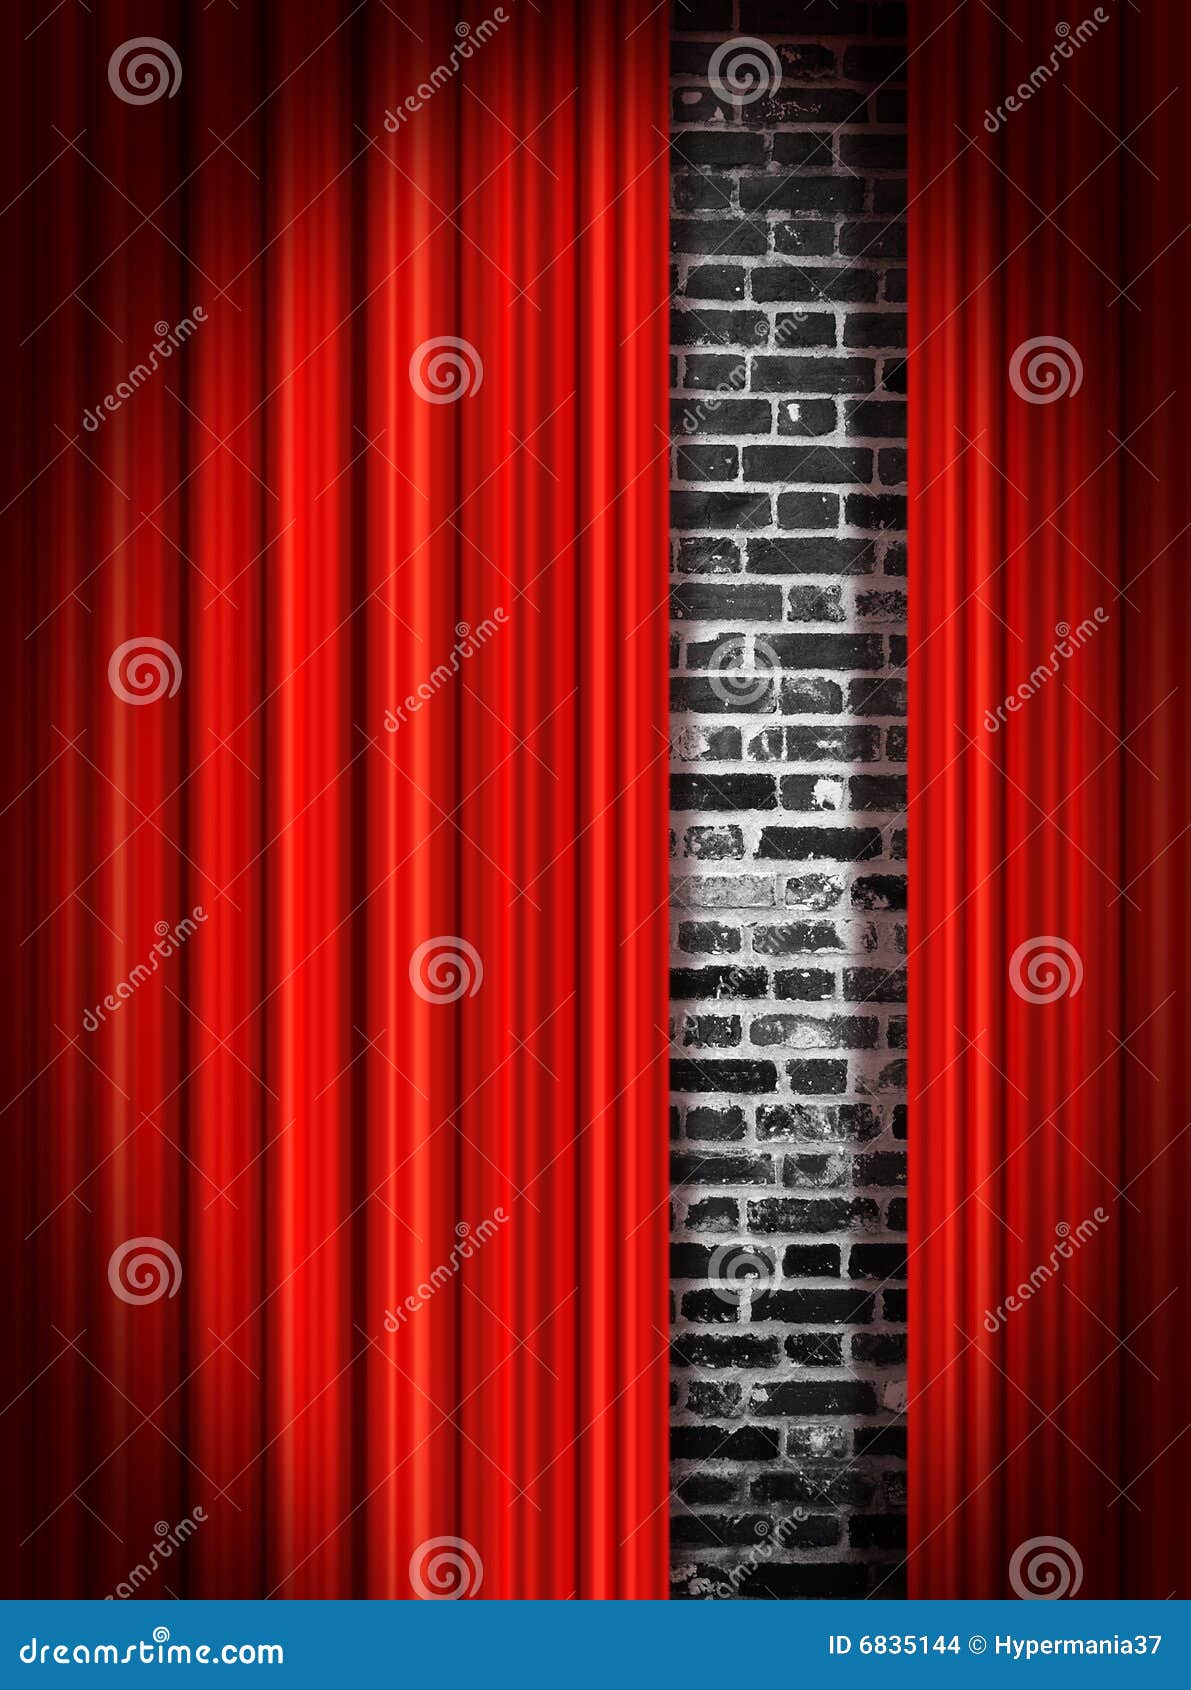 Stage Curtains stock illustration. Image of sparkle, entertainment